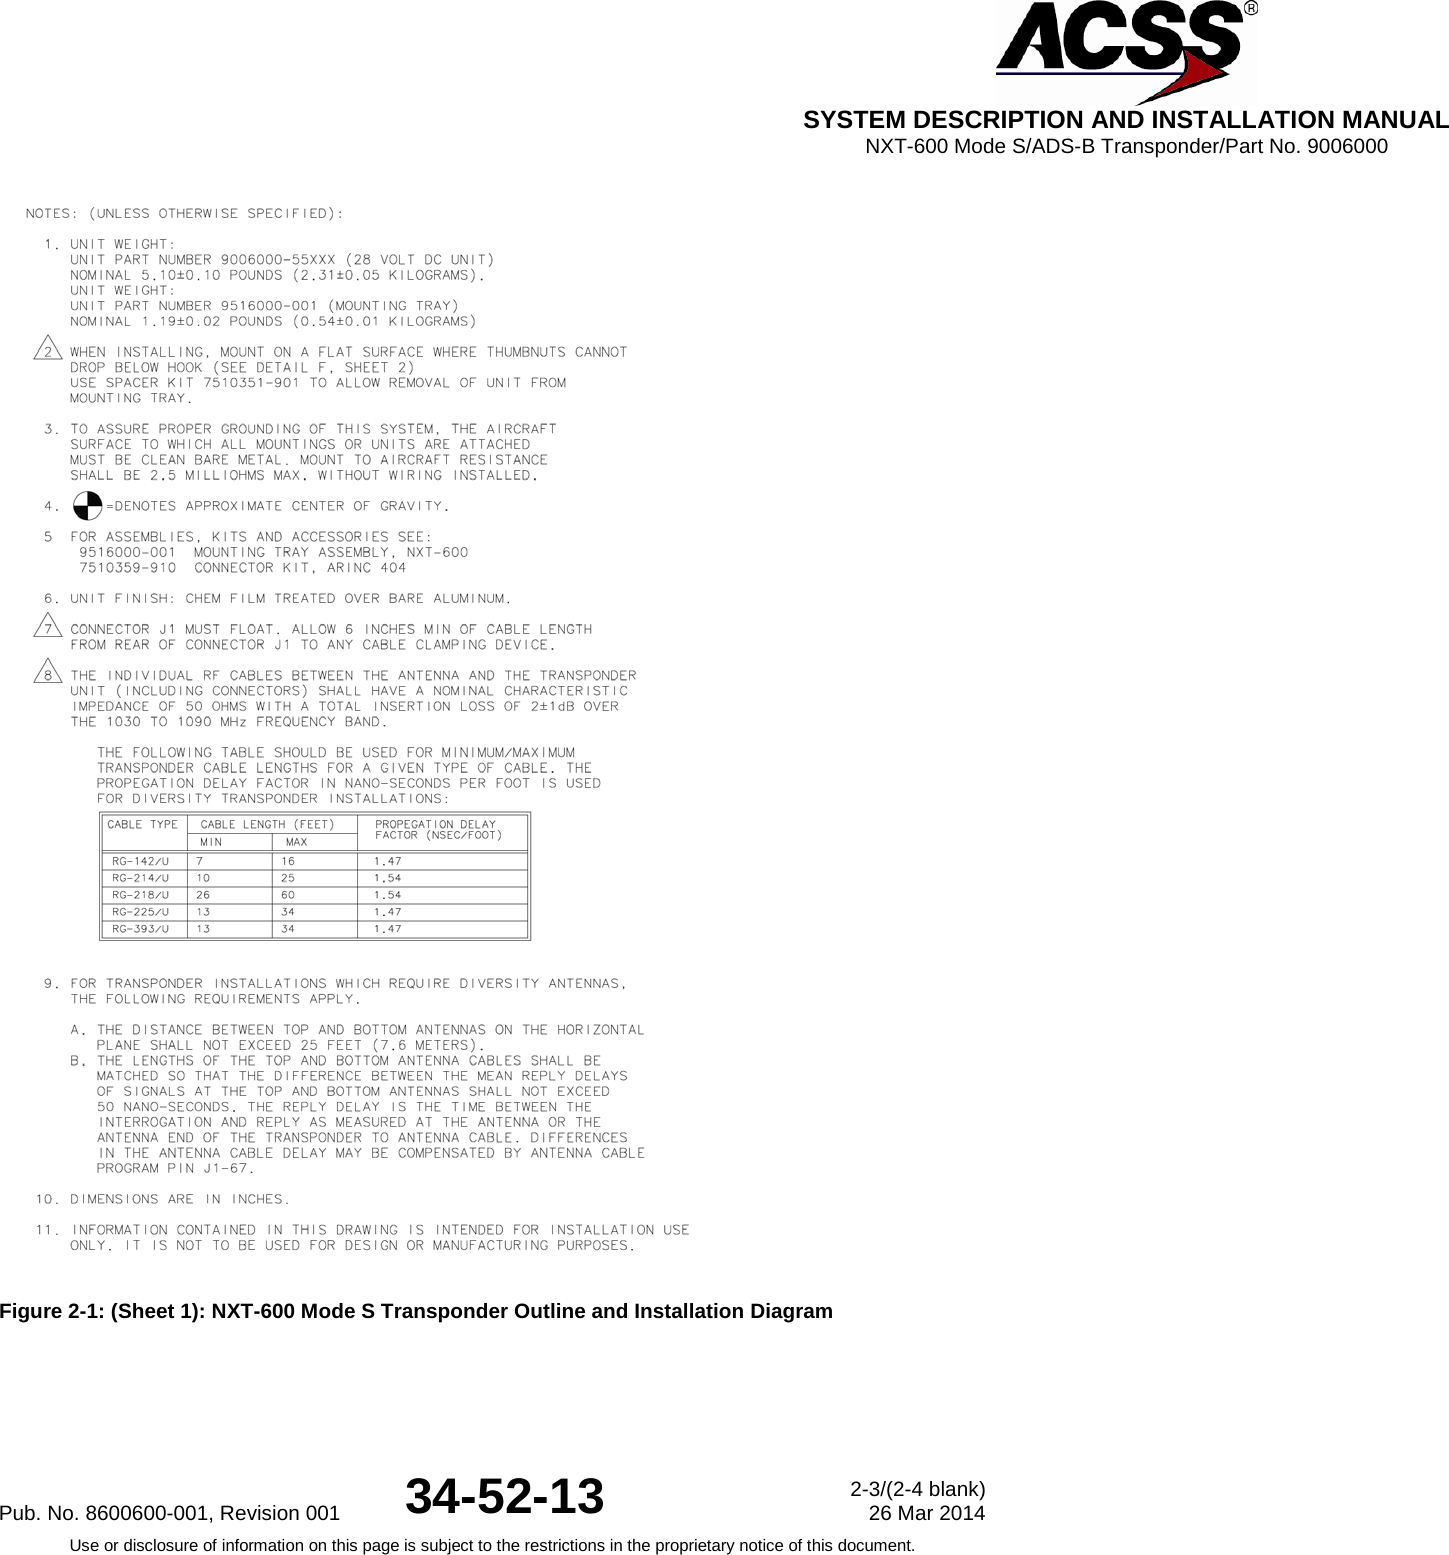  SYSTEM DESCRIPTION AND INSTALLATION MANUAL NXT-600 Mode S/ADS-B Transponder/Part No. 9006000  Figure 2-1: (Sheet 1): NXT-600 Mode S Transponder Outline and Installation DiagramPub. No. 8600600-001, Revision 001 34-52-13 2-3/(2-4 blank) 26 Mar 2014 Use or disclosure of information on this page is subject to the restrictions in the proprietary notice of this document.  